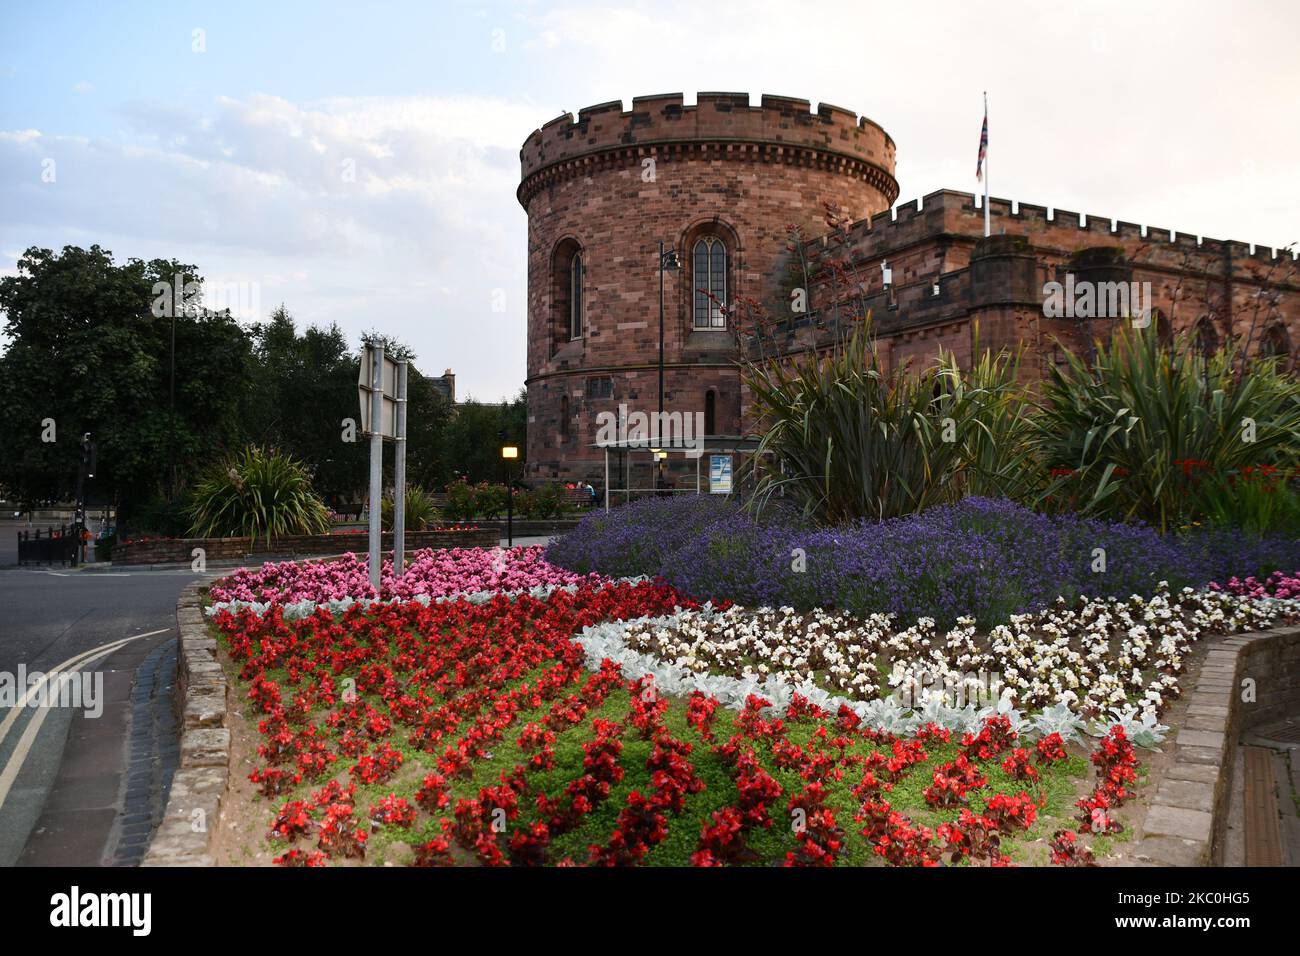 Western tower of Carlisle Citadel a former medieval fortress on English Street with a stunning floral display in the foreground. The western tower was Stock Photo